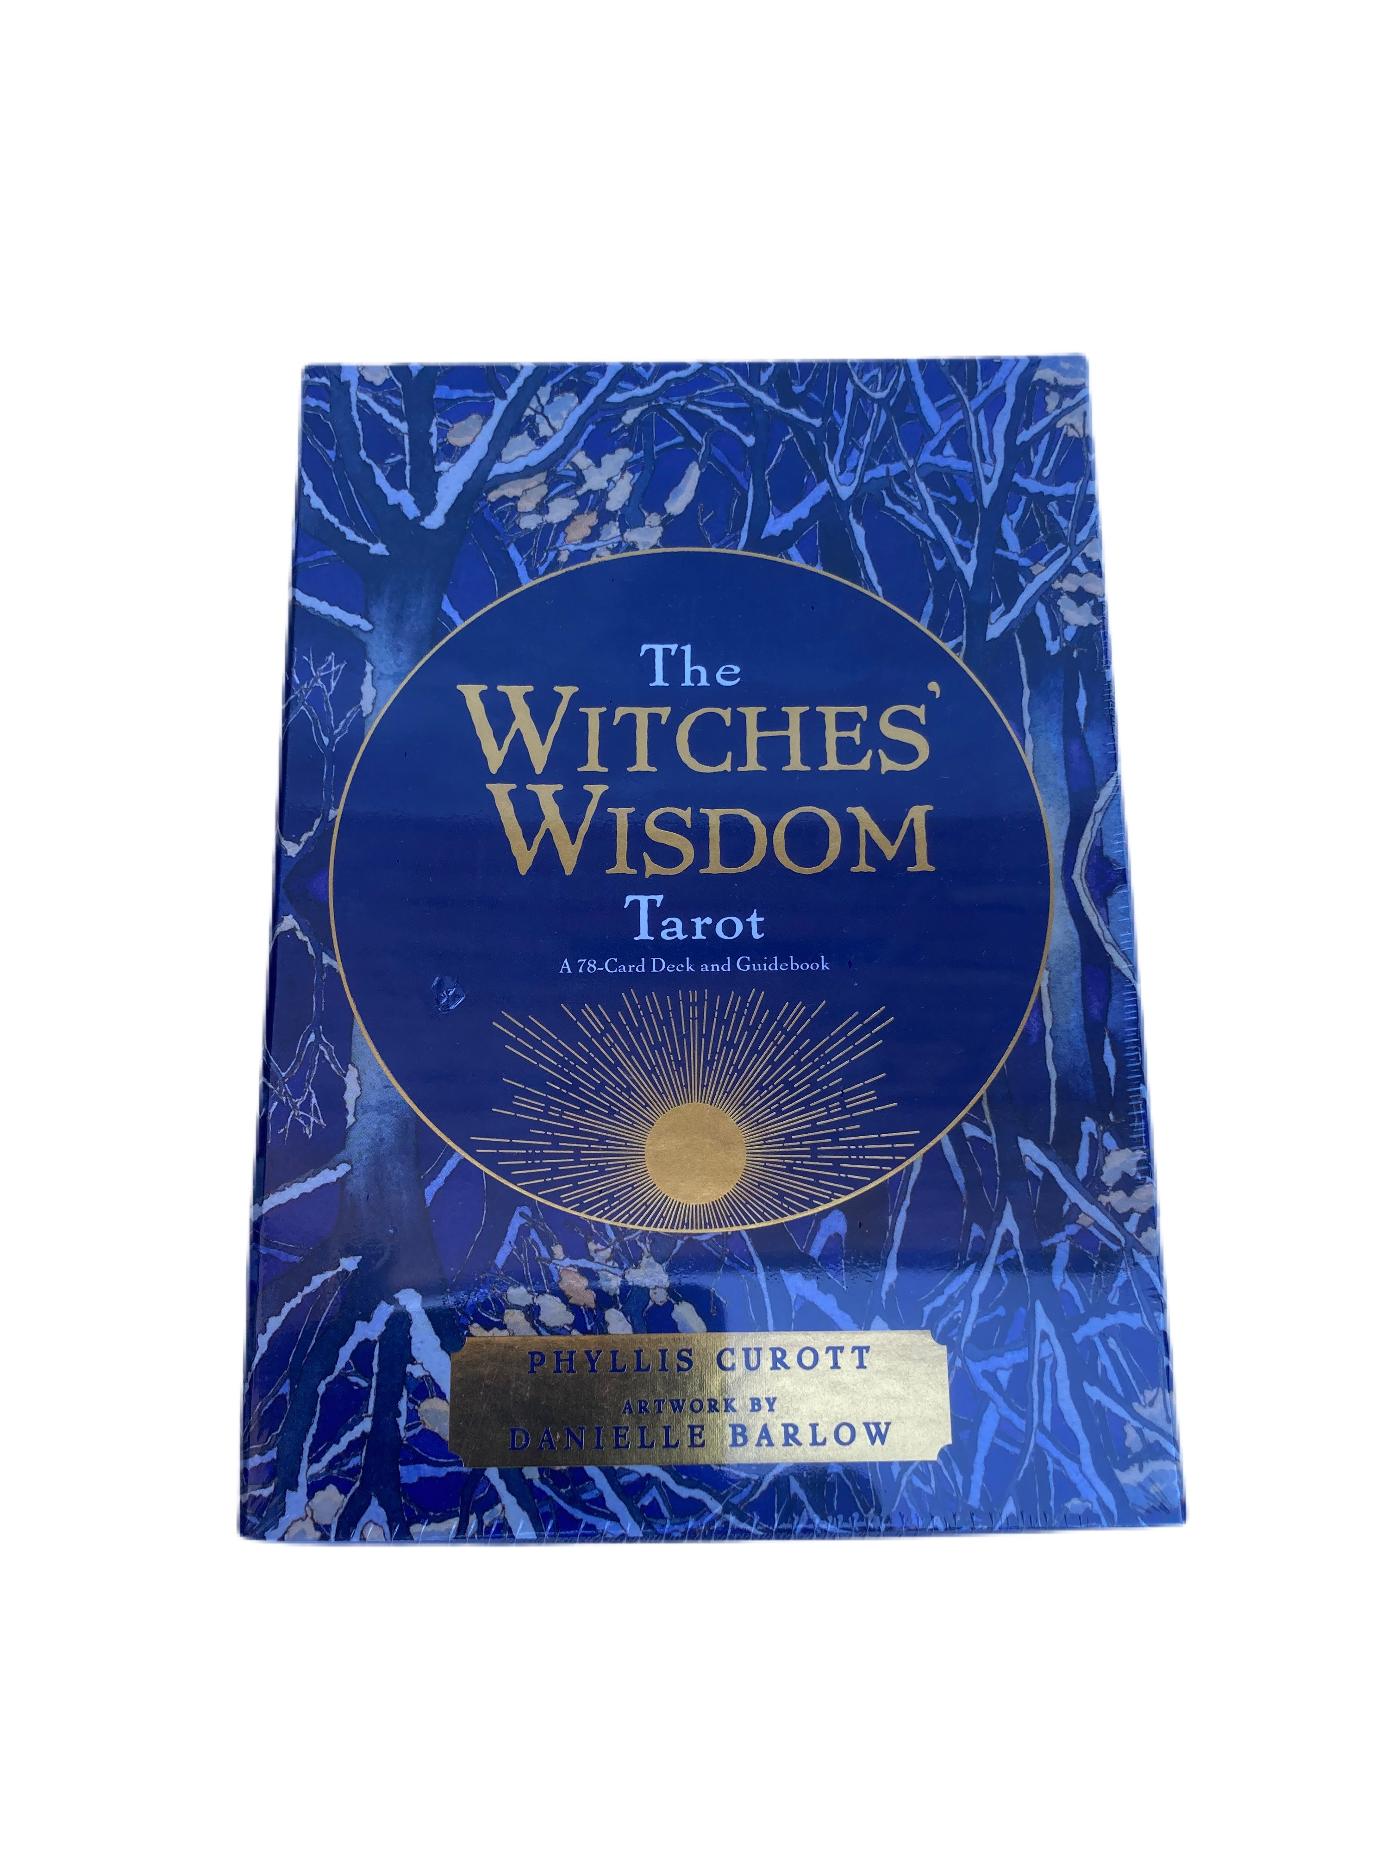 The Witches Wisdom Tarot complete edition